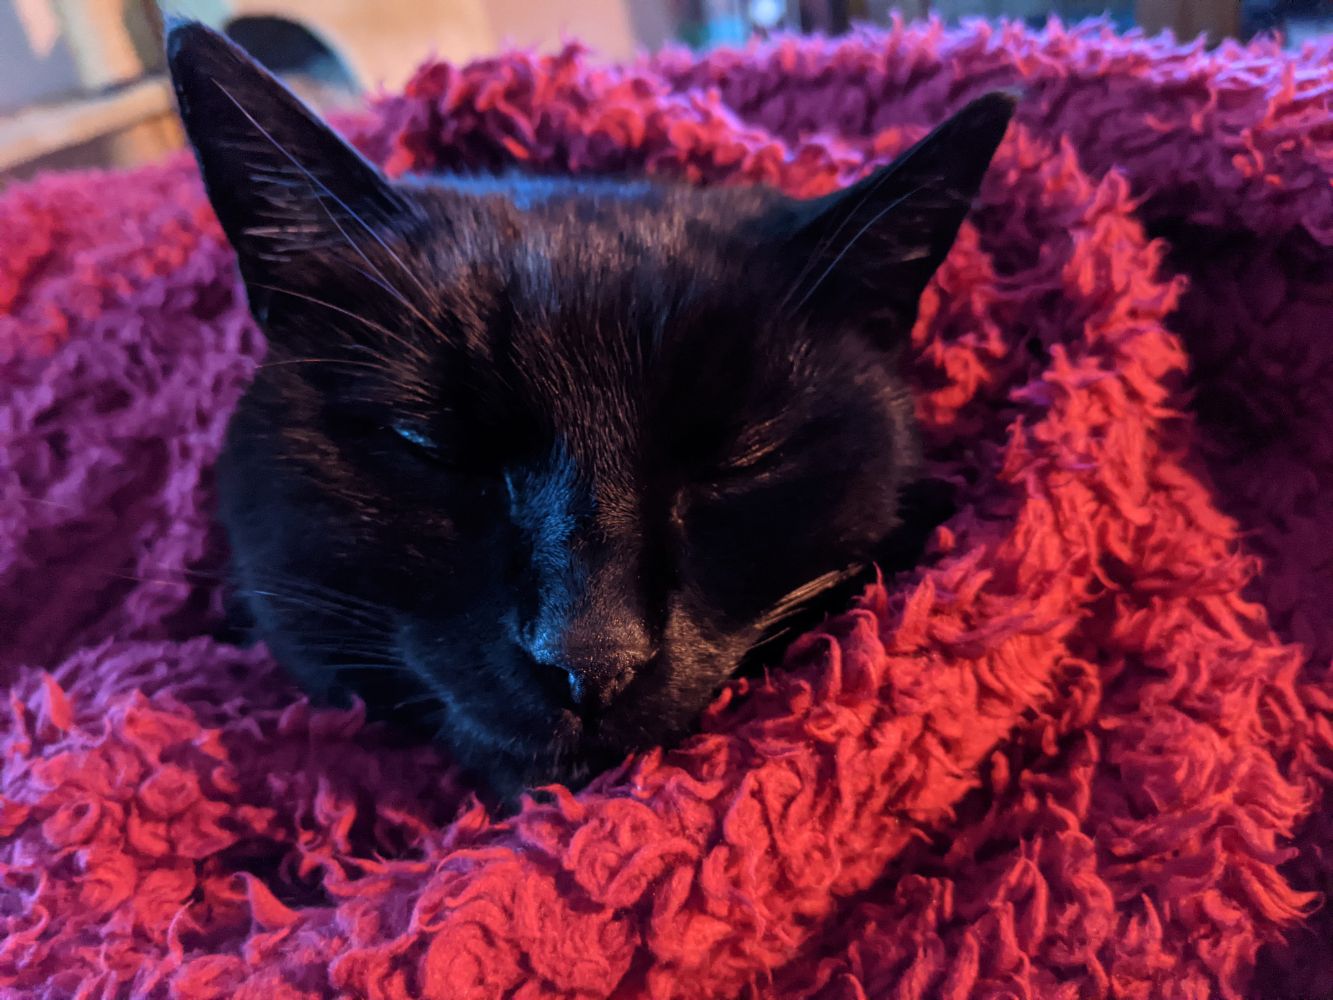 Black cat wrapped in a red blanket, only his head visible as he is so wrapped up